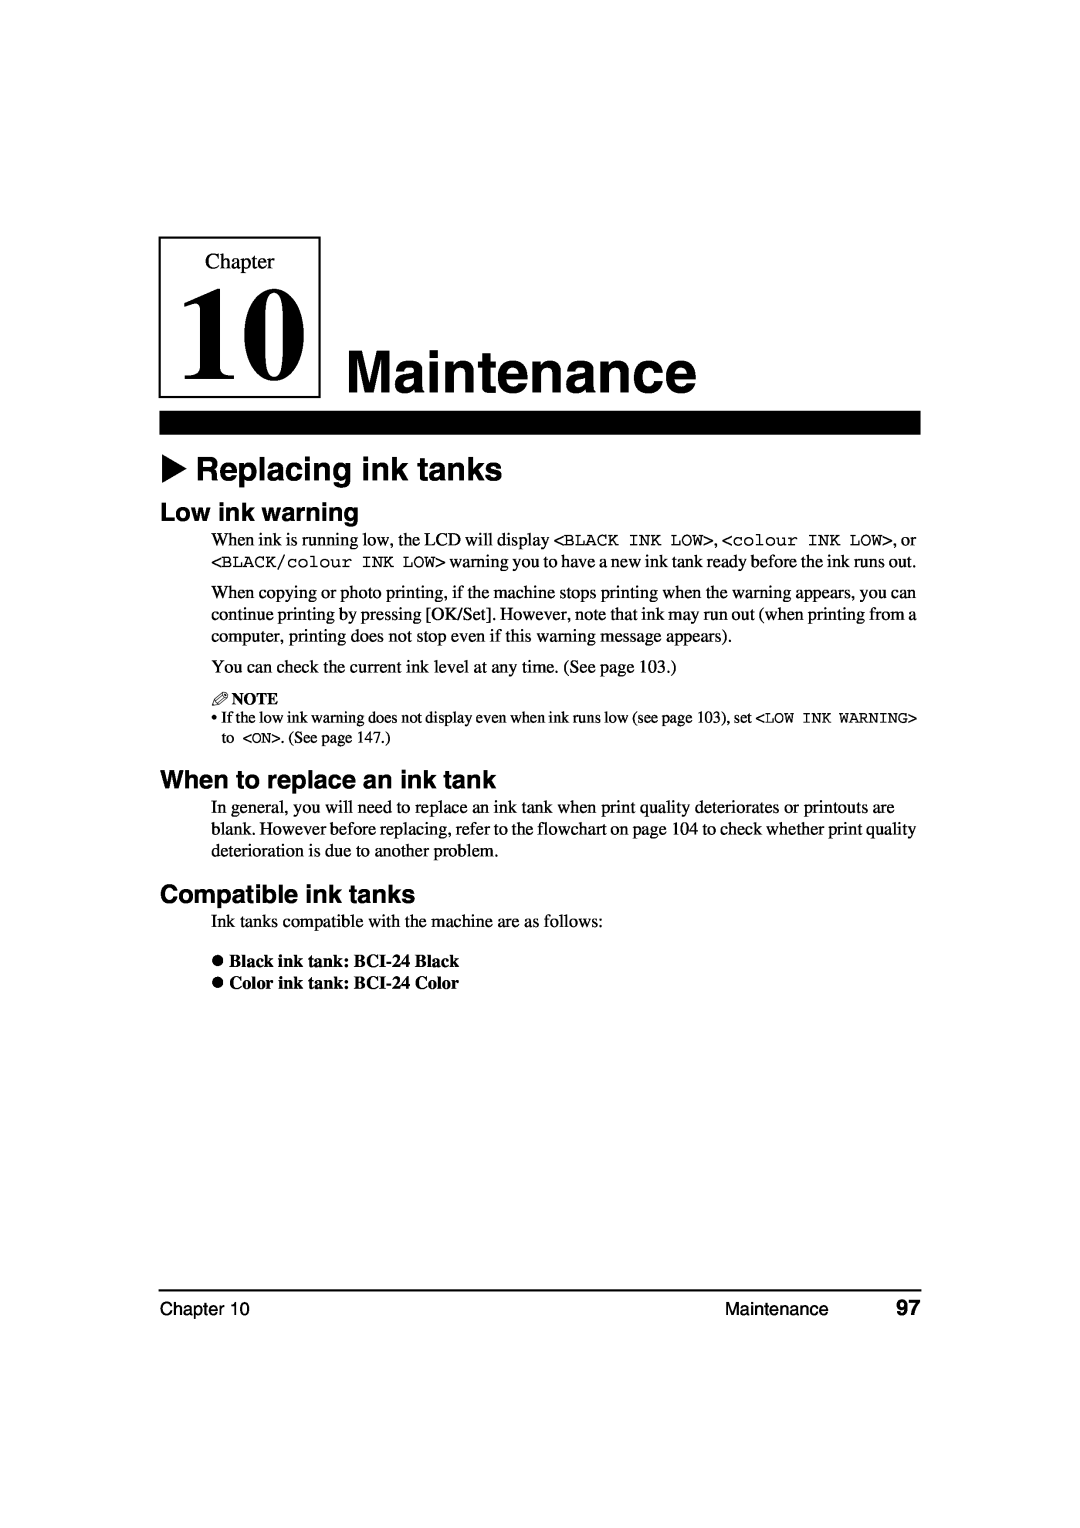 Canon MP370 Maintenance, Replacing ink tanks, Low ink warning, When to replace an ink tank, Compatible ink tanks, Chapter 